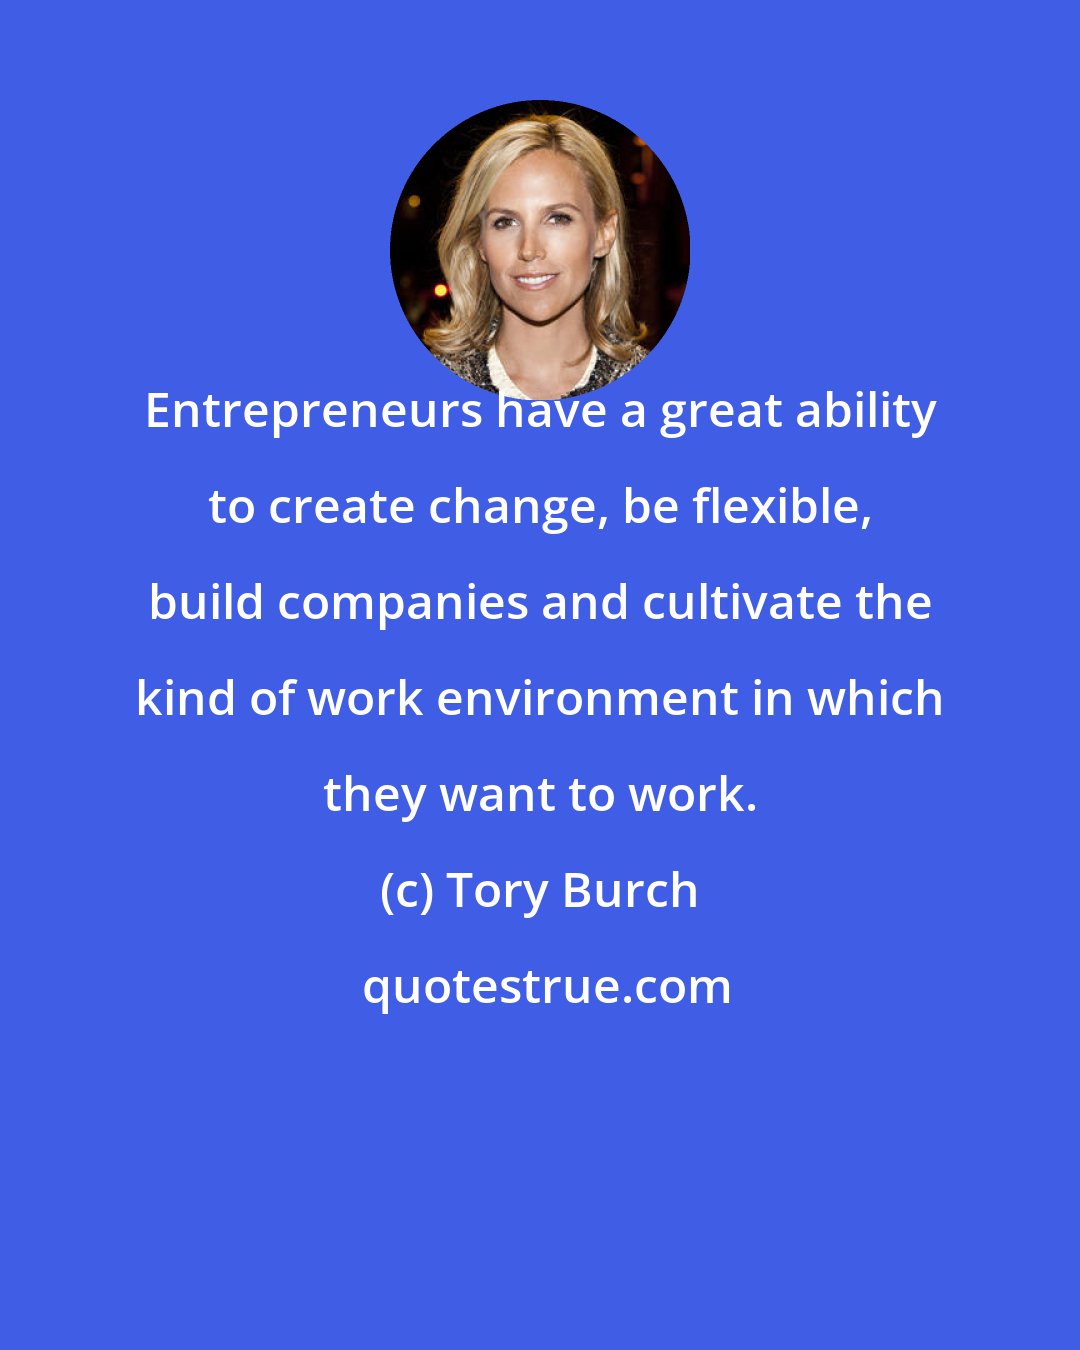 Tory Burch: Entrepreneurs have a great ability to create change, be flexible, build companies and cultivate the kind of work environment in which they want to work.